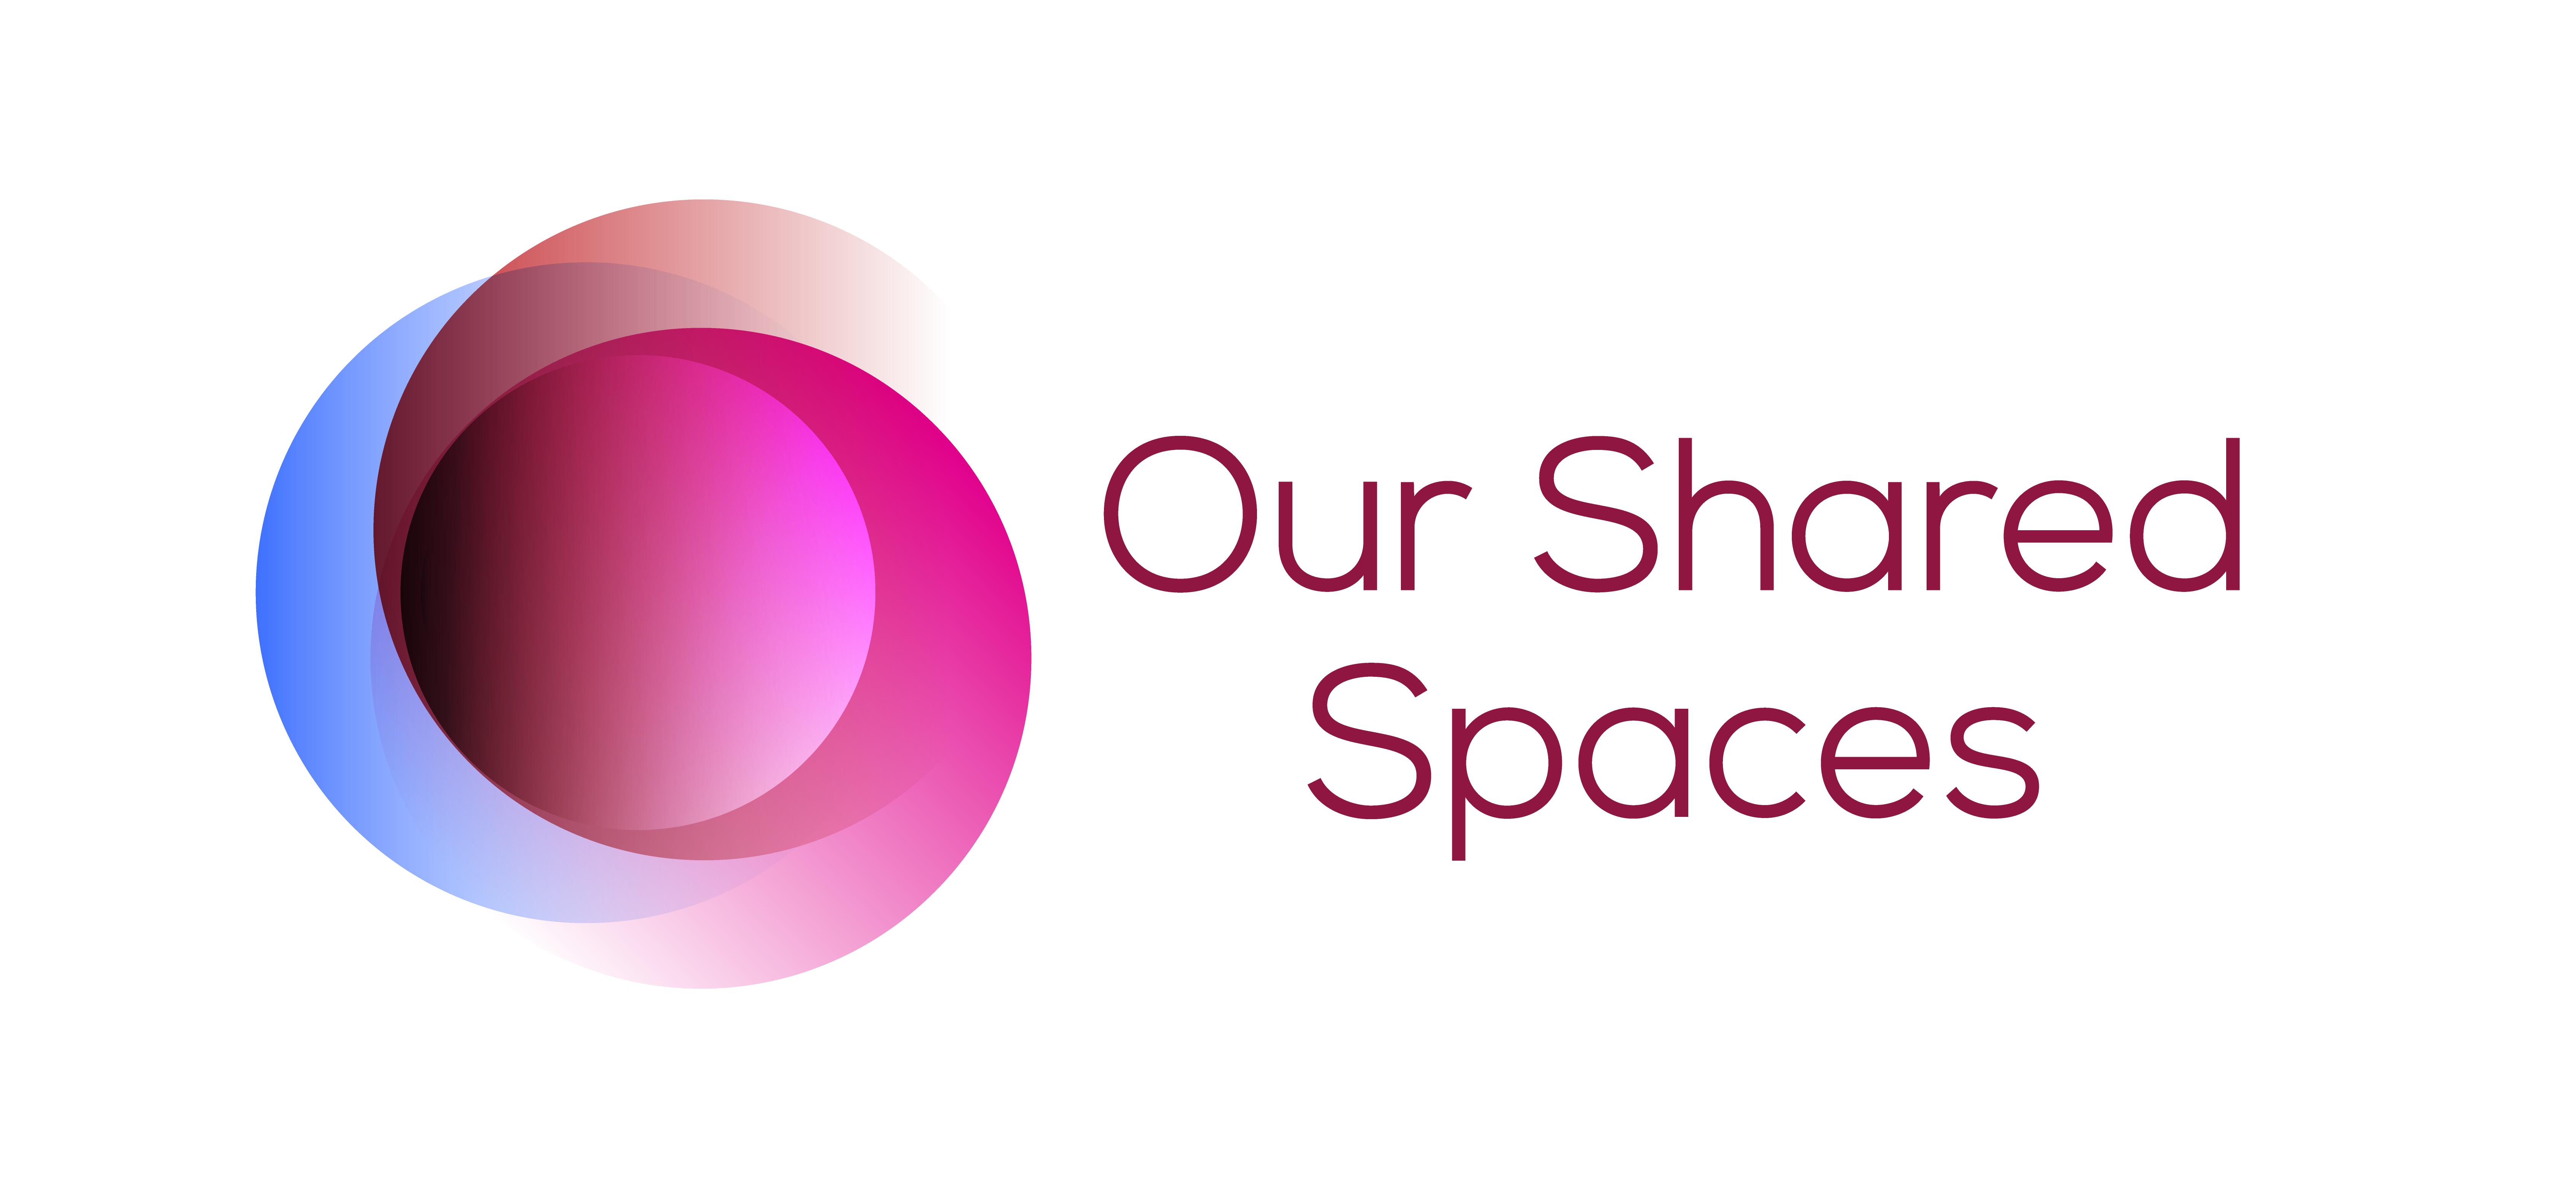 Our shared spaces logo